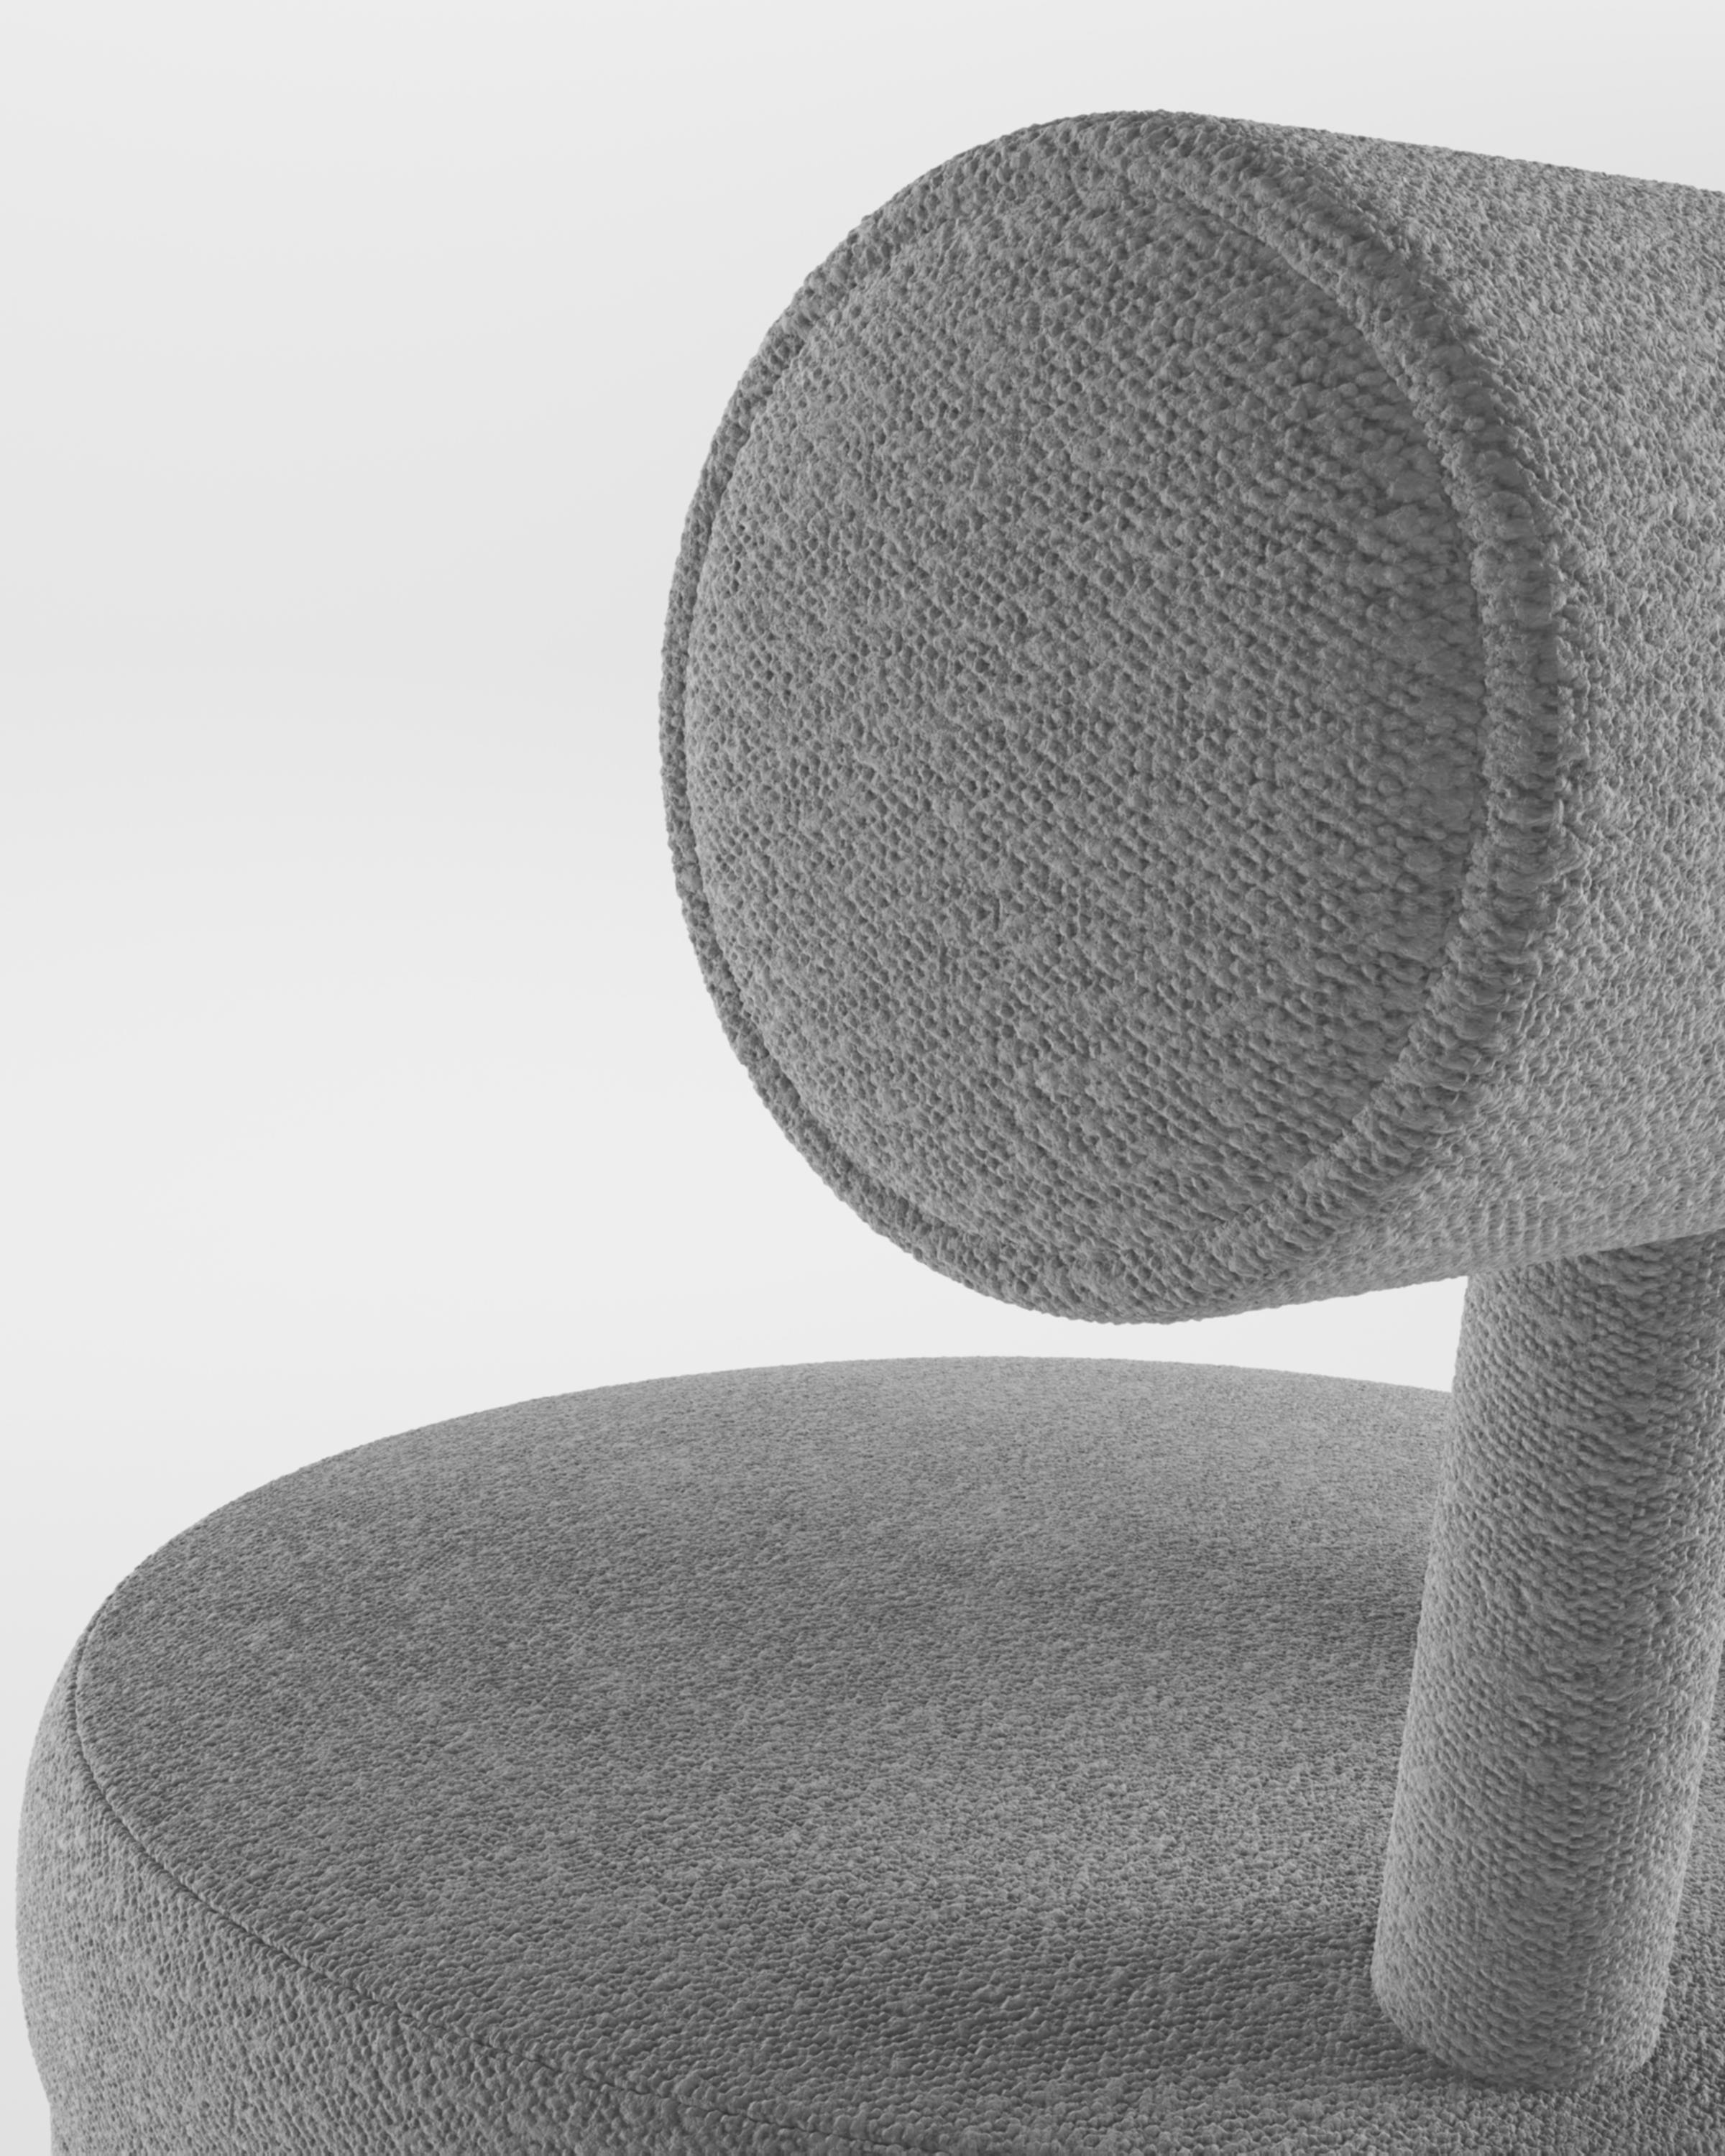 Contemporary Modern Moca bar chair in fabric by Studio Rig for Collector Studio.

A chair that mixes both modern and classical design approaches.
Designed to hug the body, durable and solid chair features a body structure produced in solid